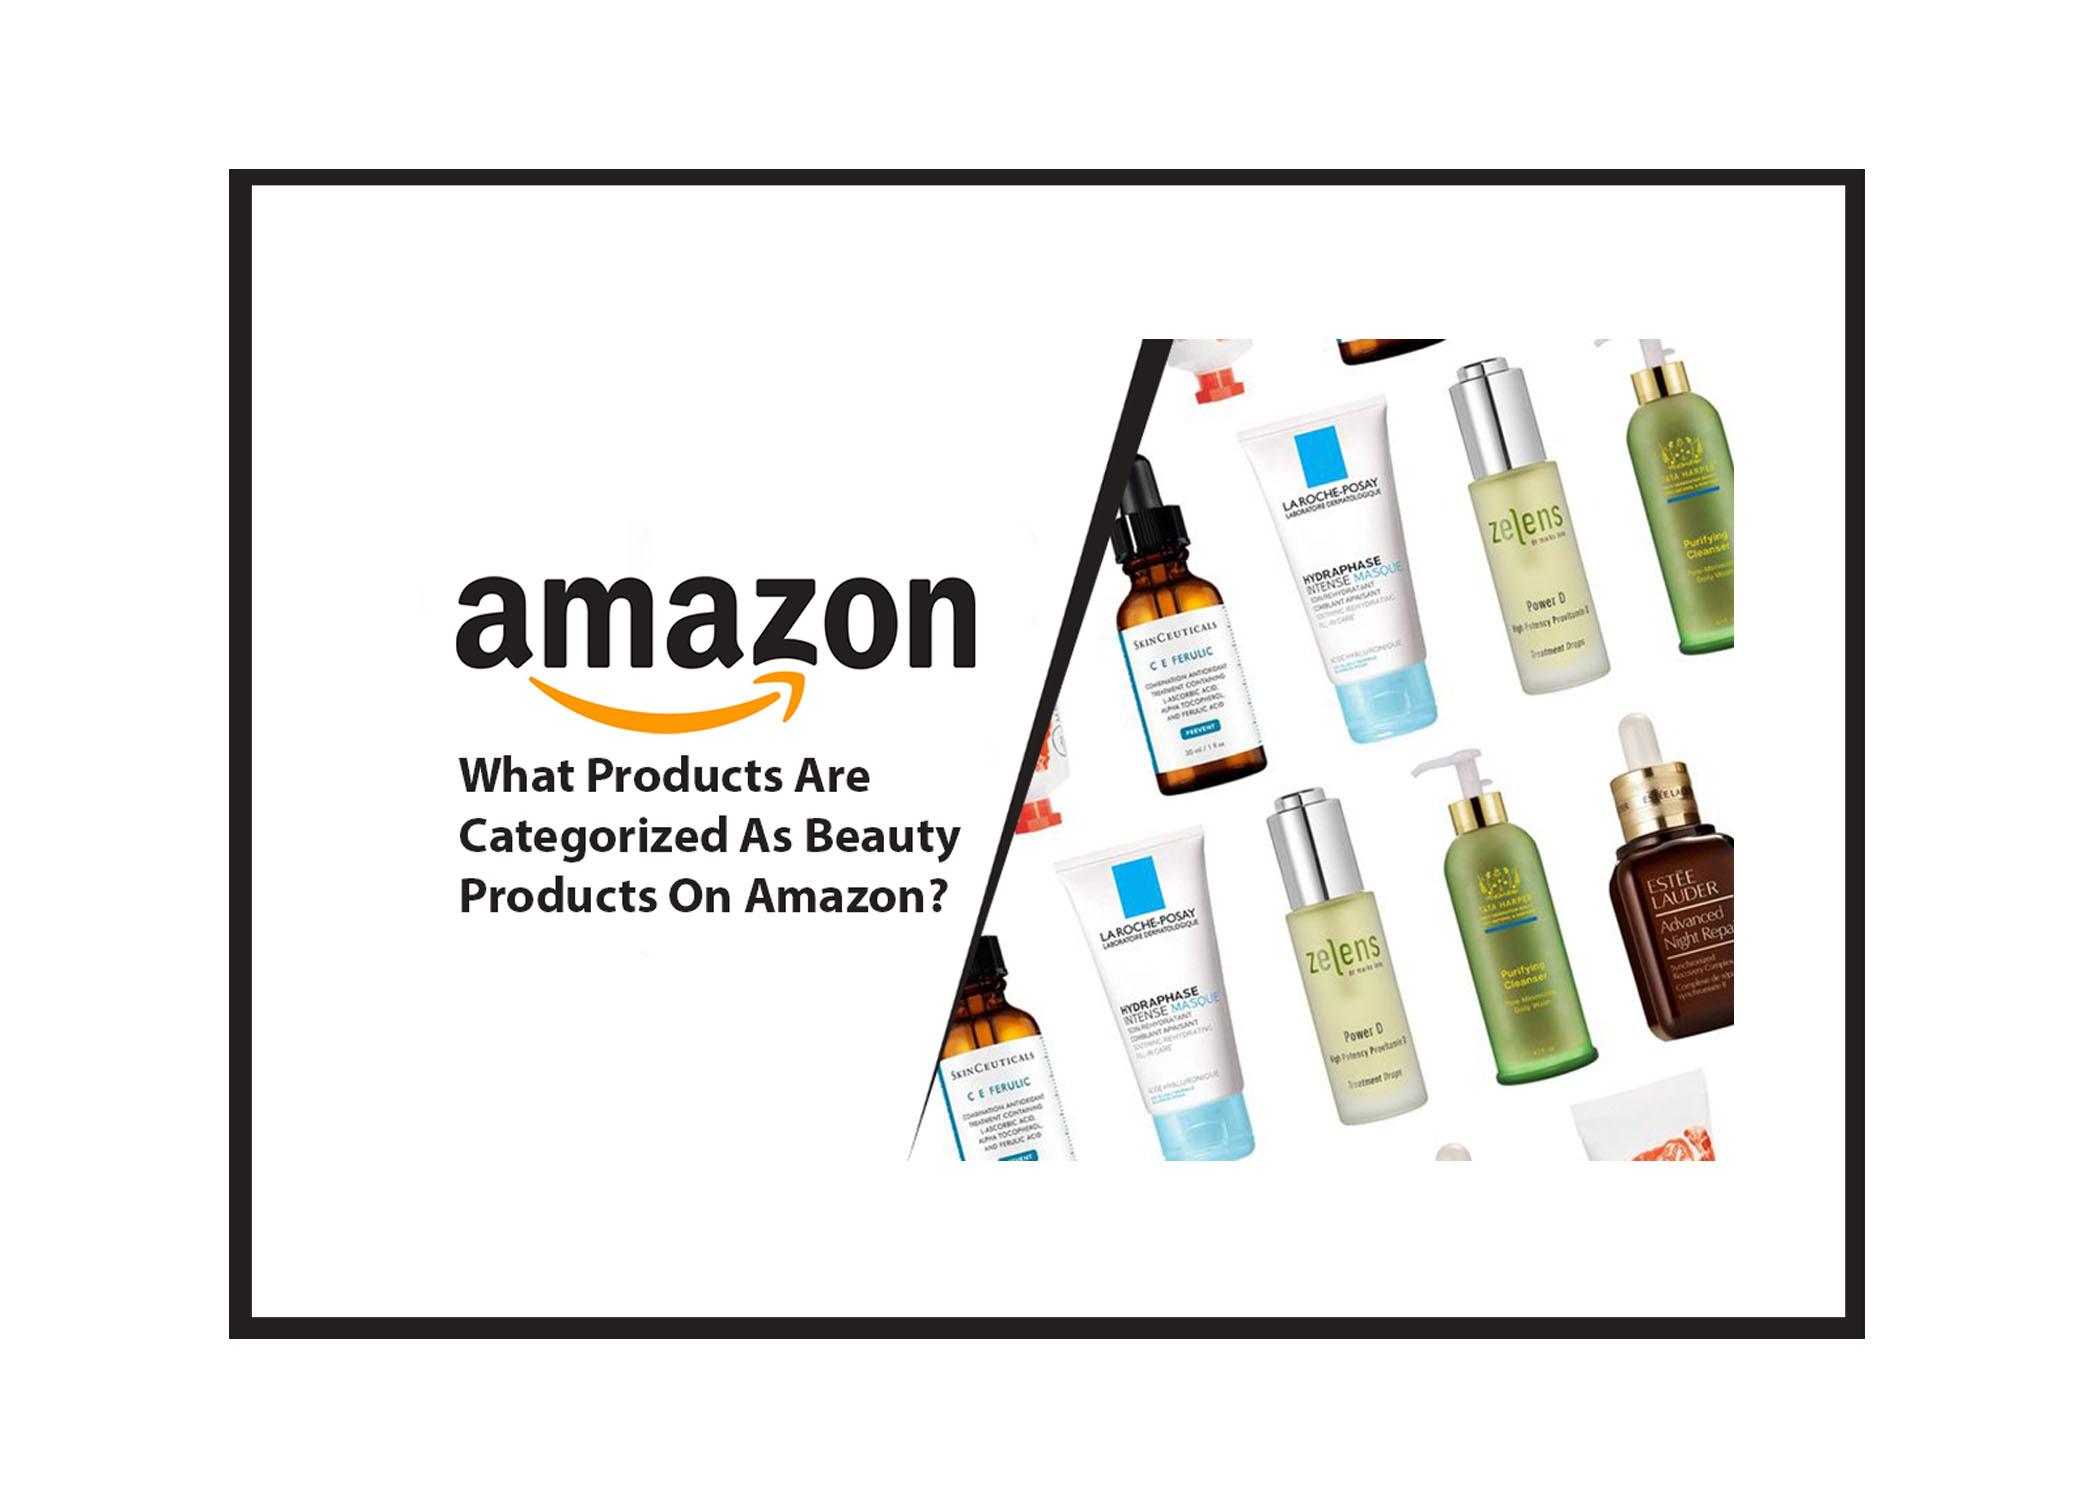 What Products Are Categorized As Beauty Products On Amazon?